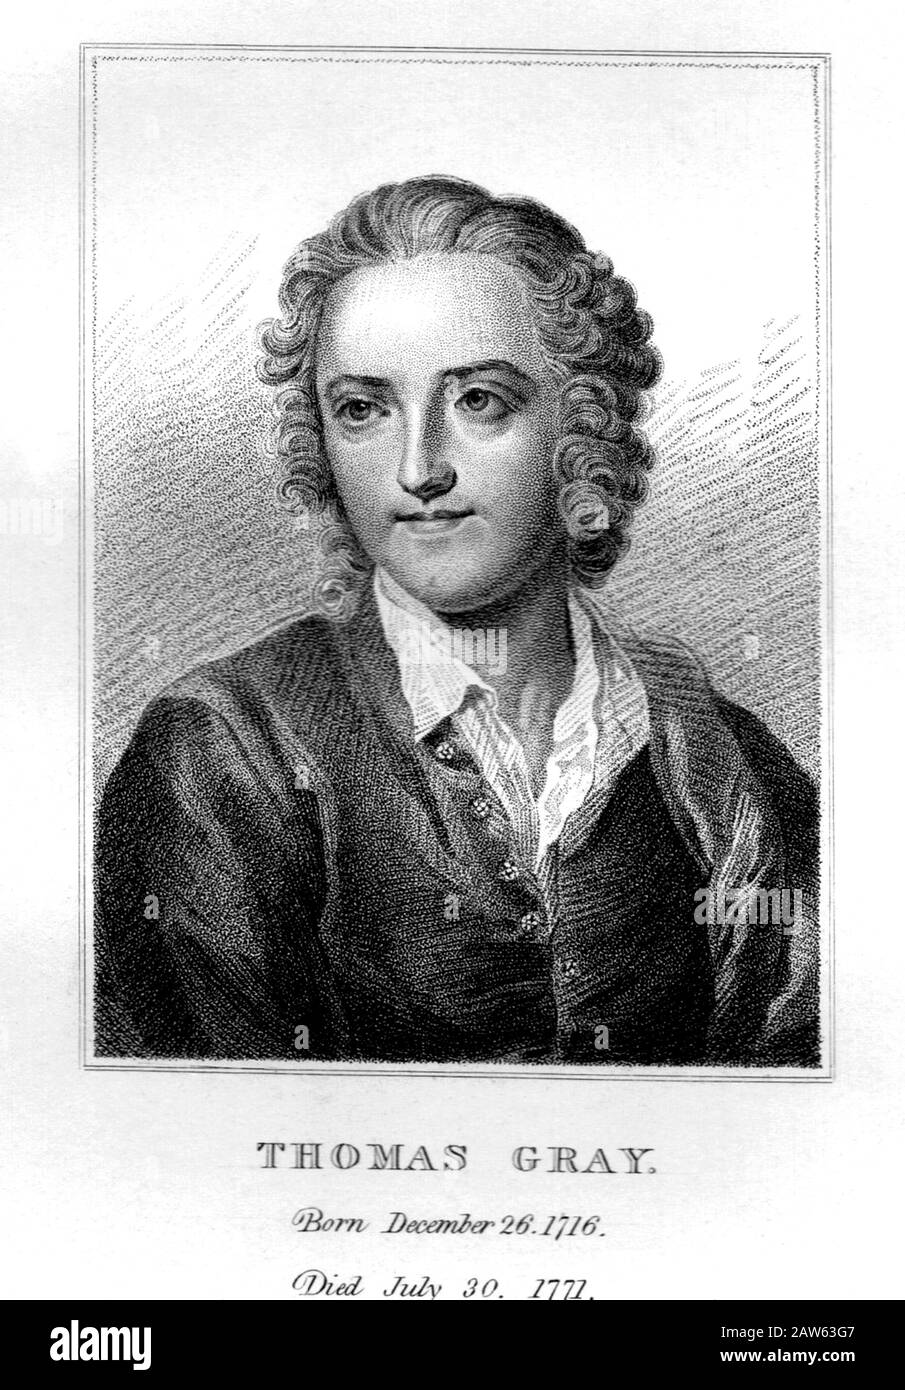 1790 ca , GREAT BRITAIN : The british poet THOMAS GRAY ( 1716 - 1771 ), portrait engraving from original work by painter John Giles . Gray was a lette Stock Photo